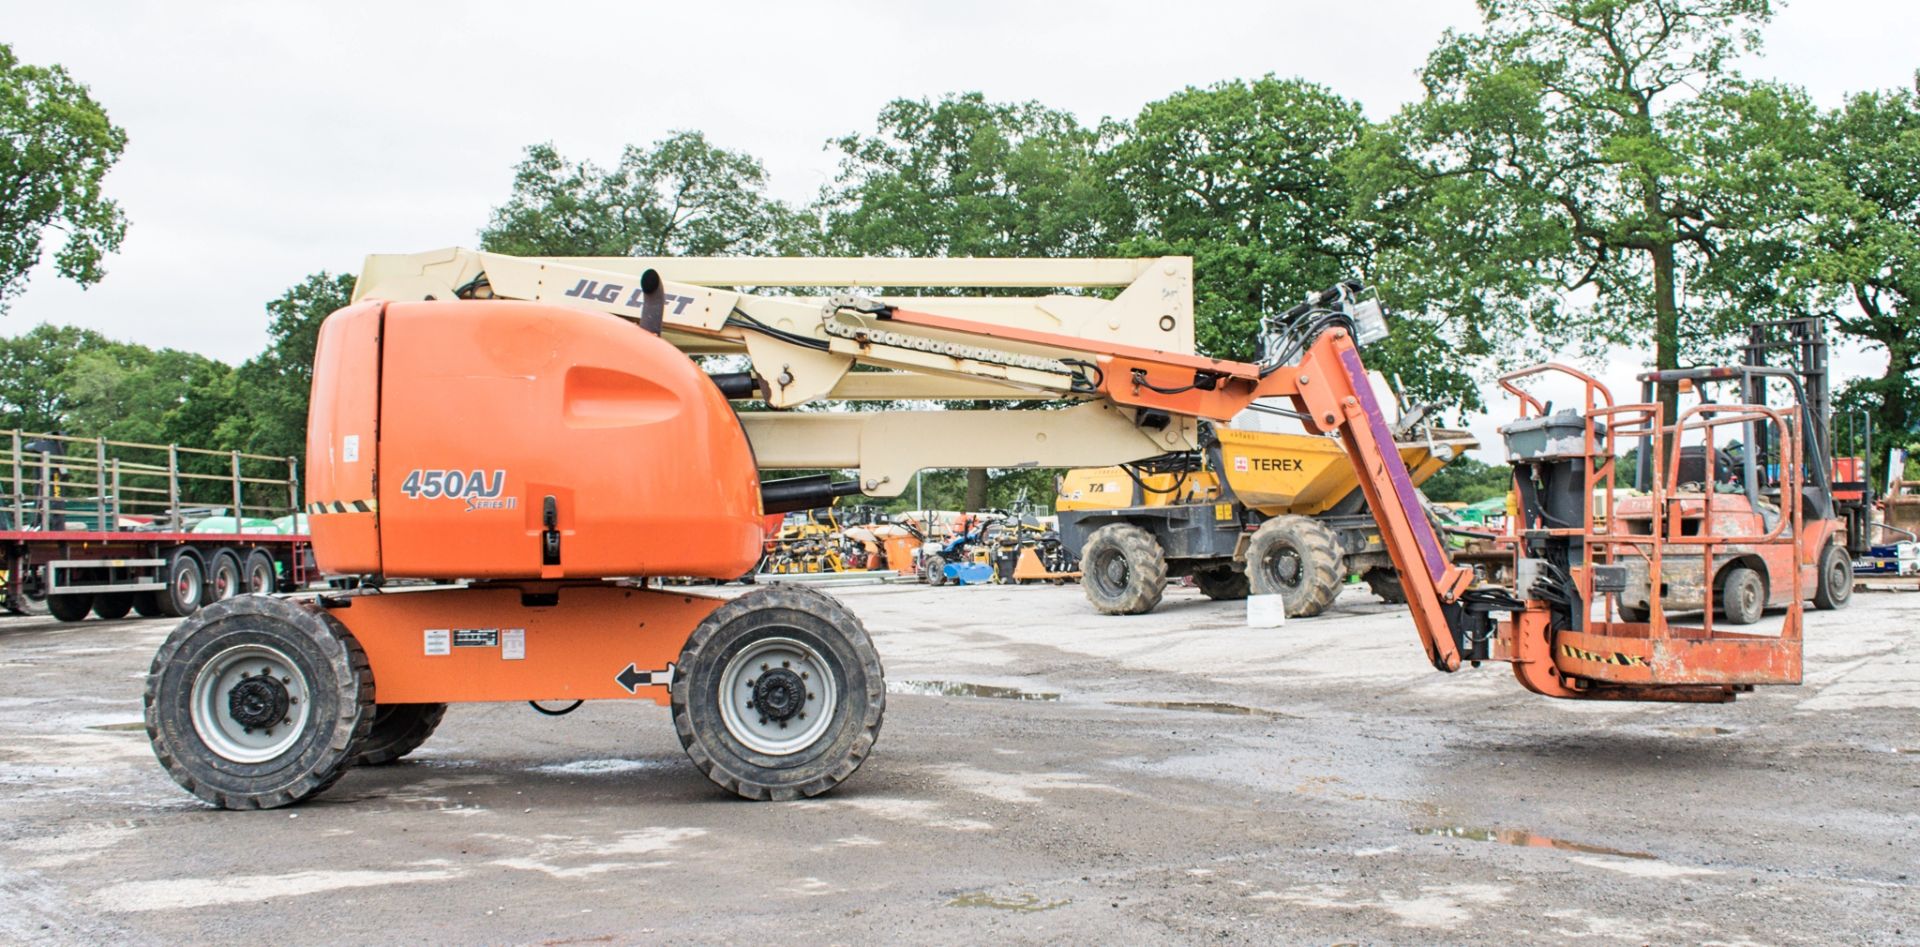 JLG 450AJ 45 ft diesel driven 4WD articulated boom lift Year: 2008 S/N: 5149 Recorded Hours: 2283 - Image 8 of 20